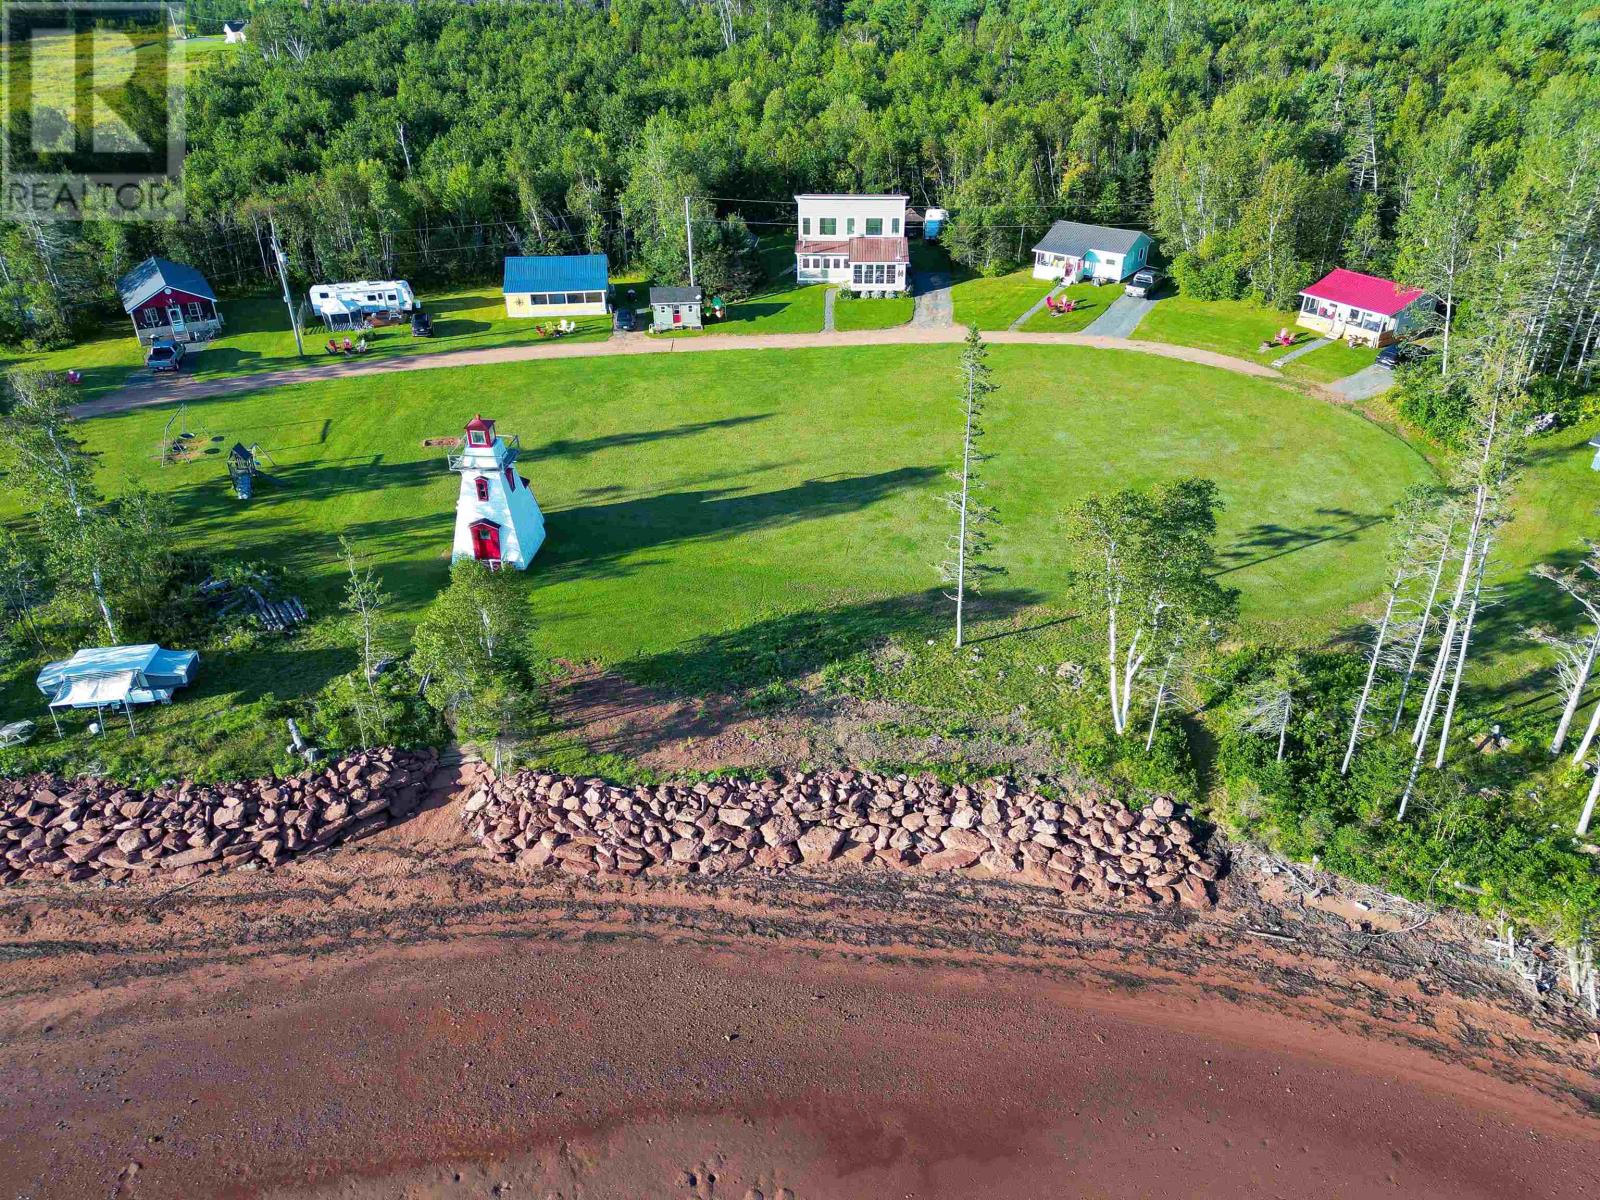 355, 359, 363, 367, 371 Morrison's Beach Road355, 359, 363, 367, 371 Morrison's Beach Road, Georgetown Royalty, Prince Edward Island C0A1L0, ,Other,For Sale,355, 359, 363, 367, 371 Morrison's Beach Road,202318157